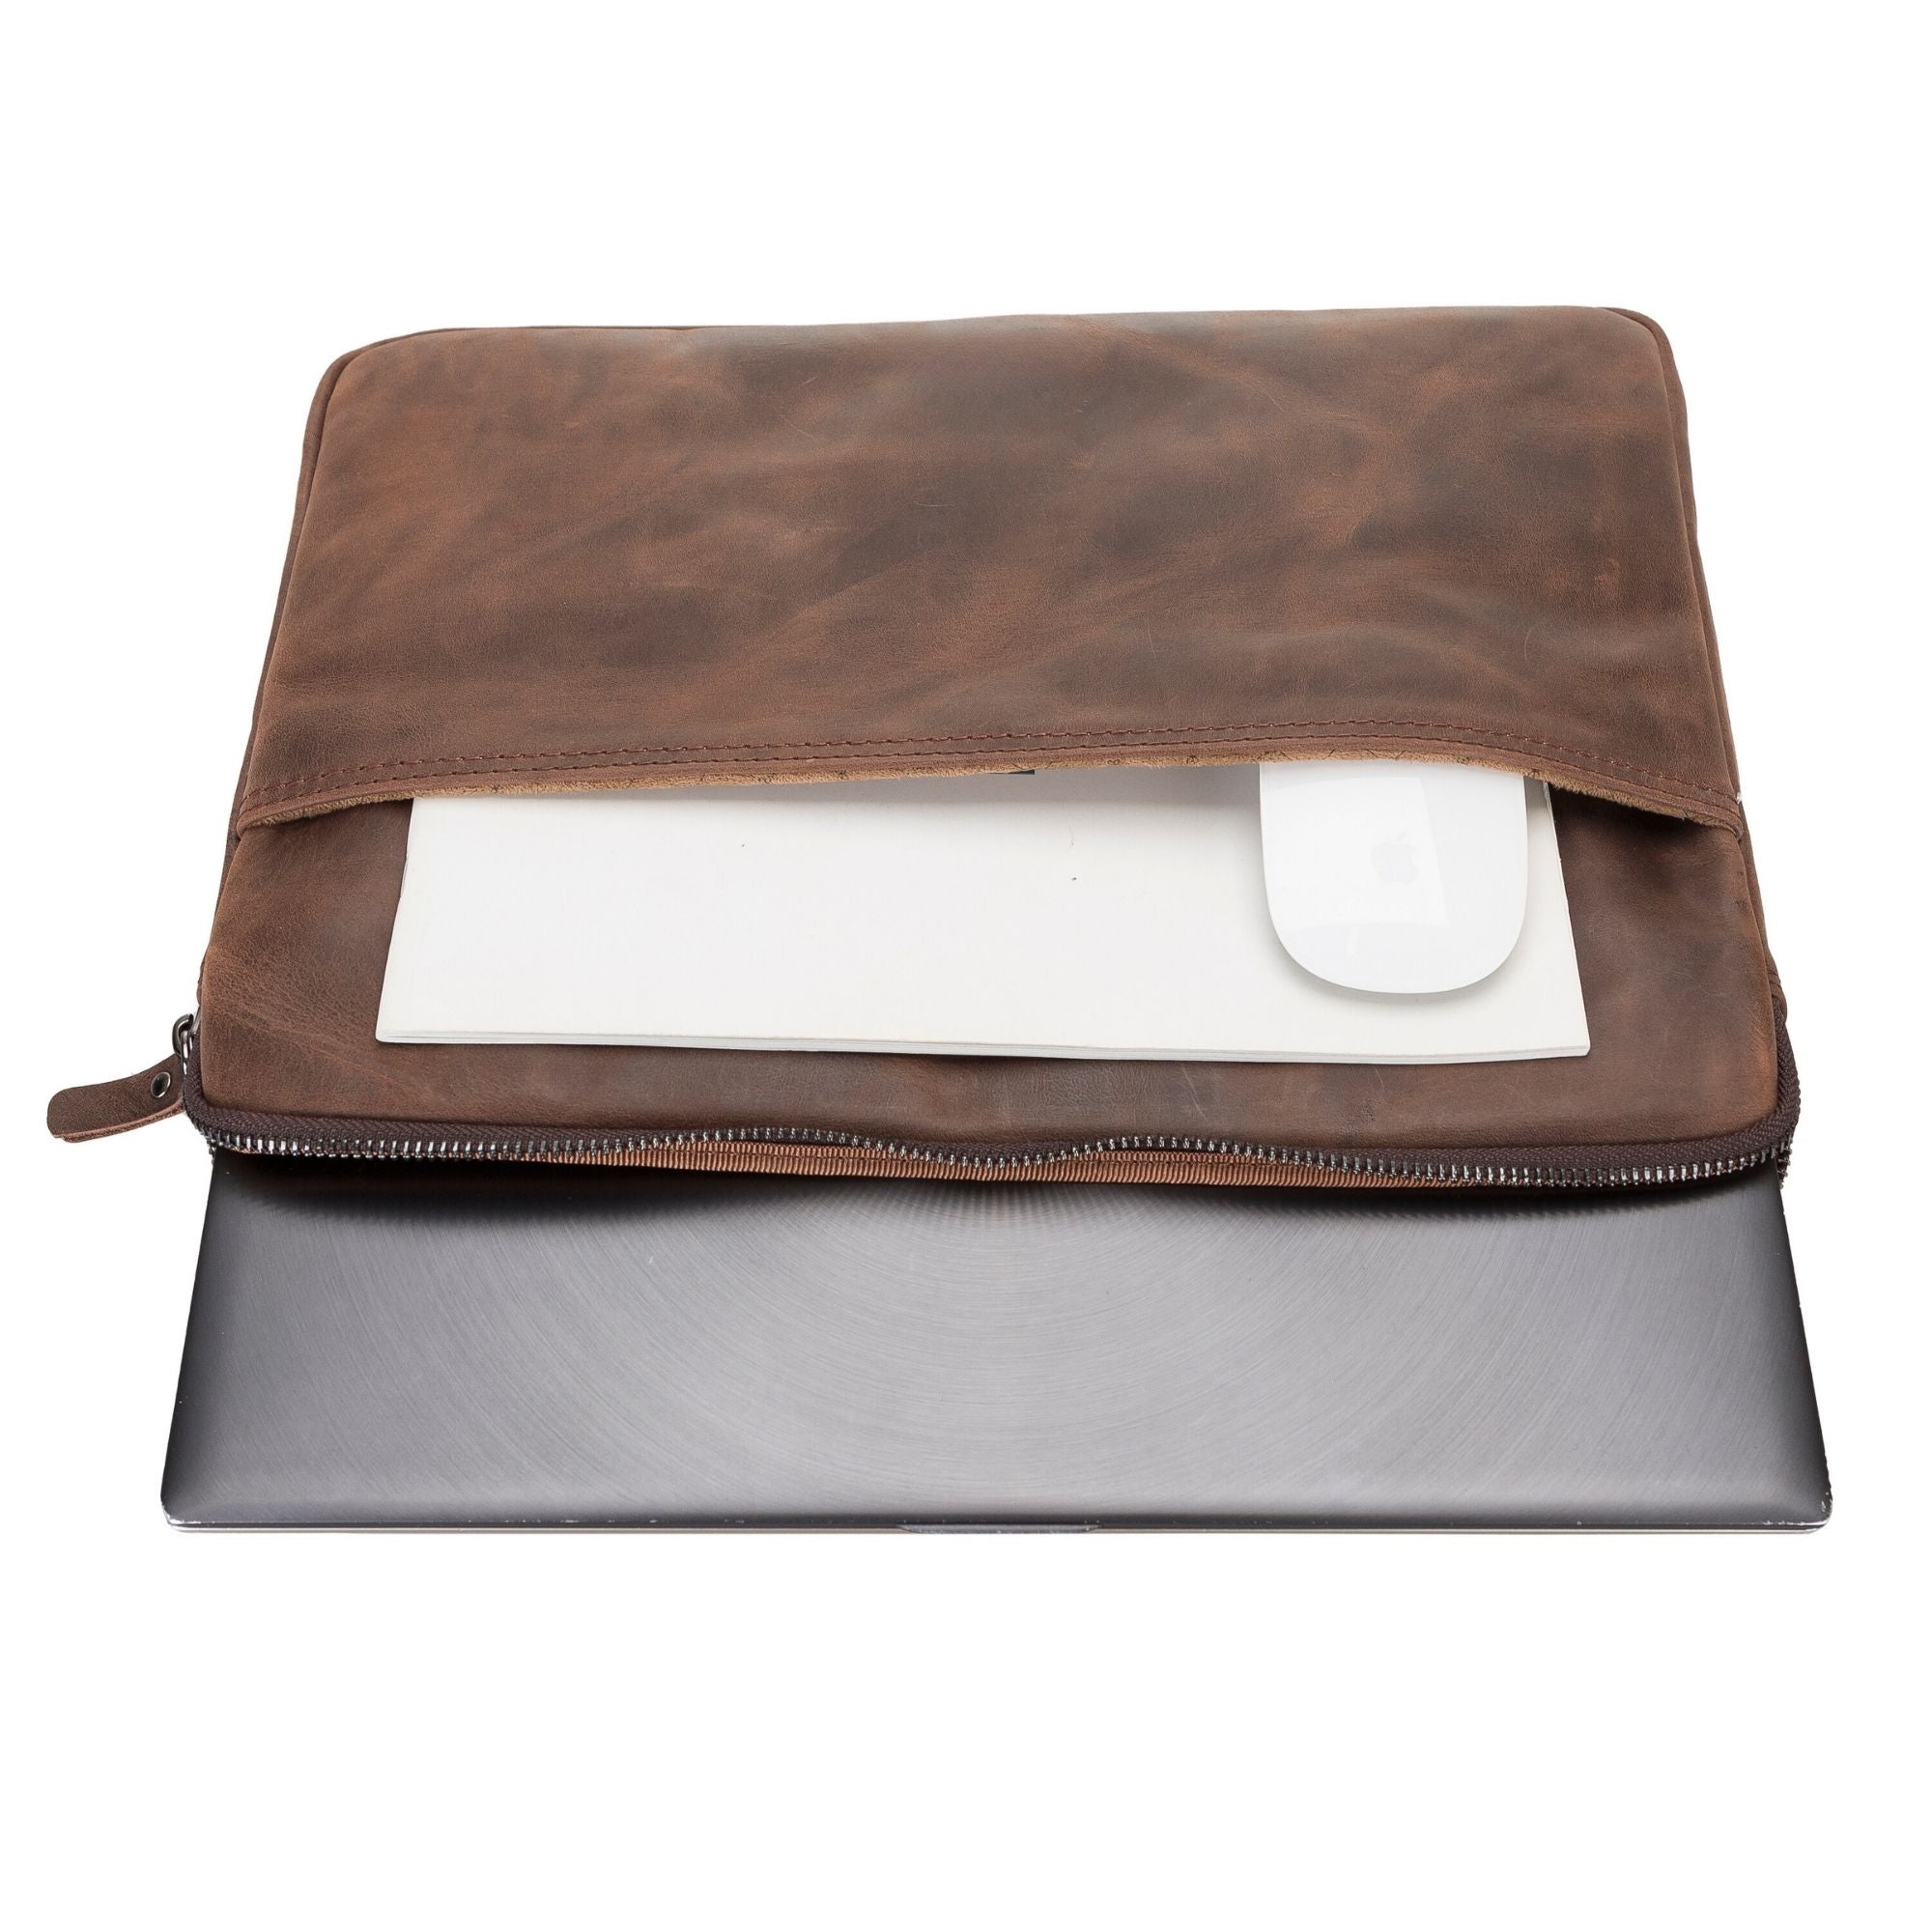 Kemmerer Leather Sleeve for iPad and MacBook - 11 Inches - Dark Brown - TORONATA